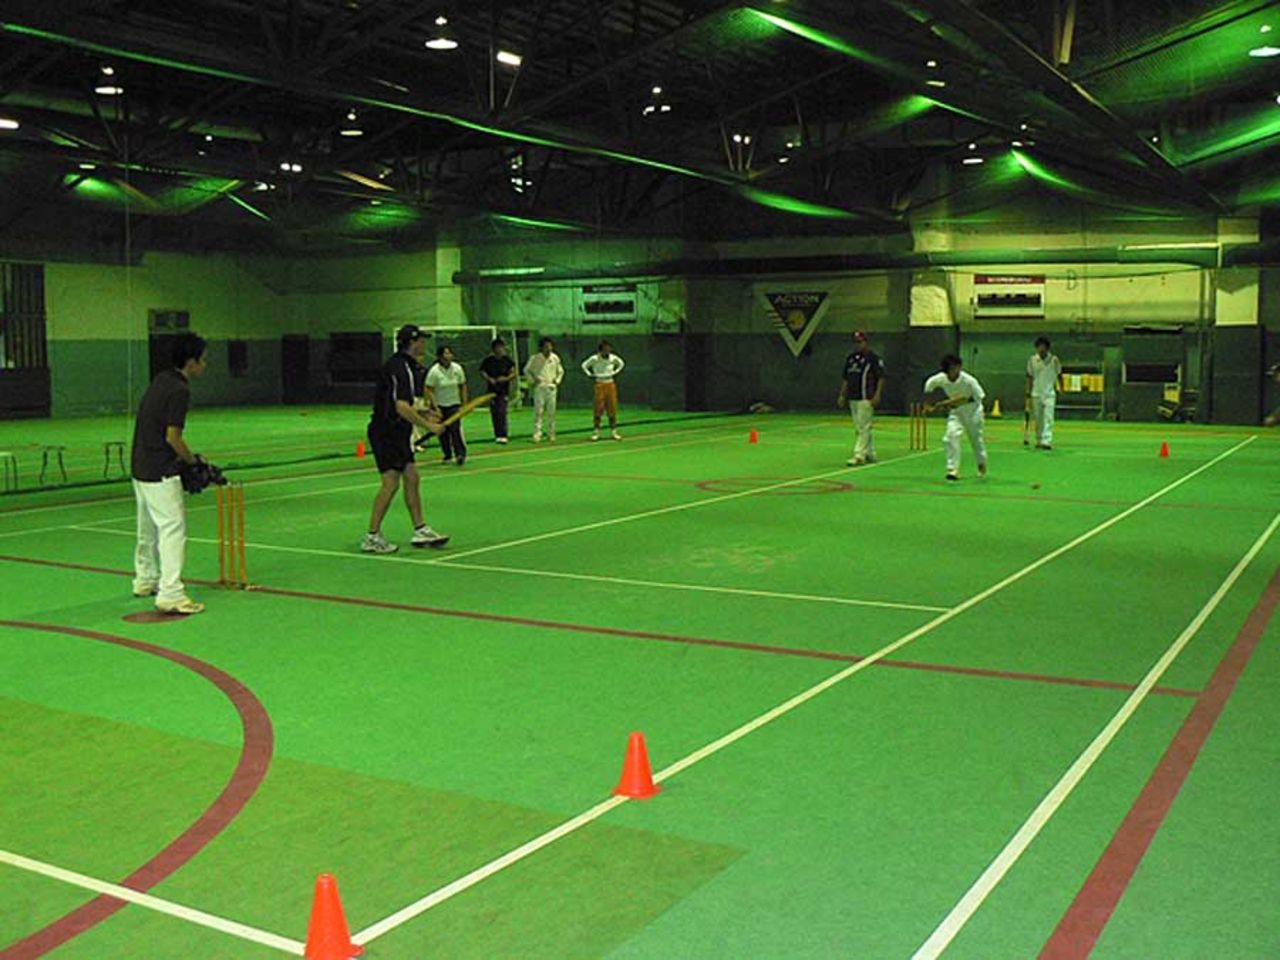 Practice facilities for cricket in Japan, Tokyo, February 2013